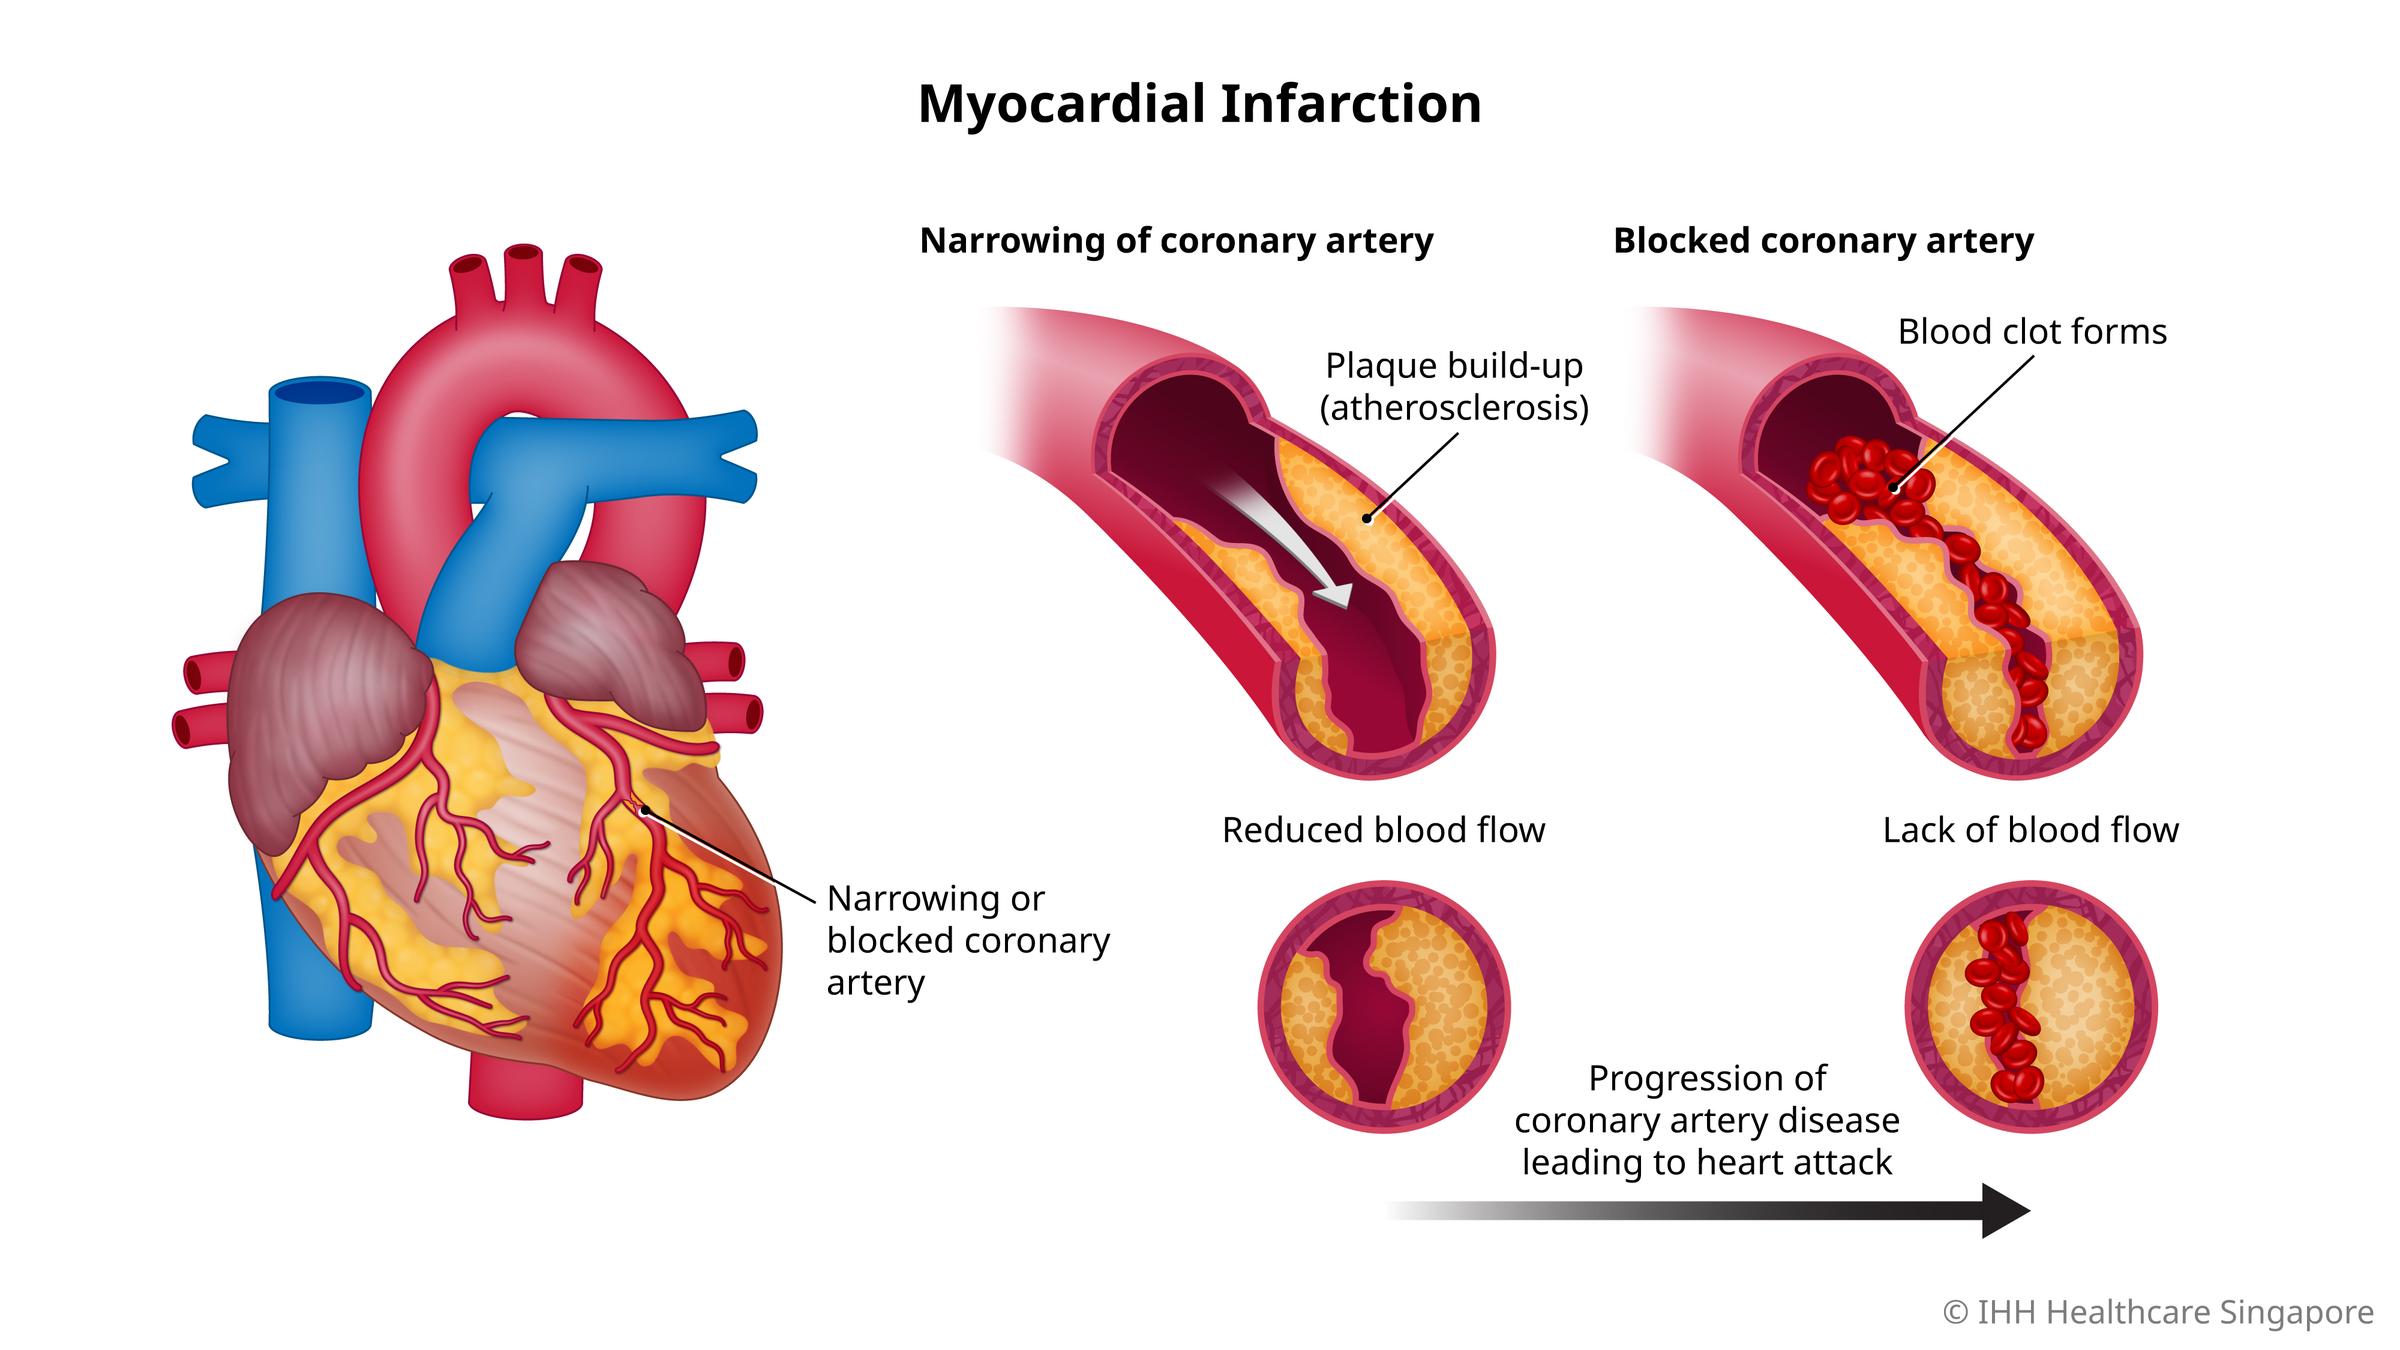 Myocardial infarction happens when blood flow to the heart is severely reduced or blocked due to artherosclerosis.